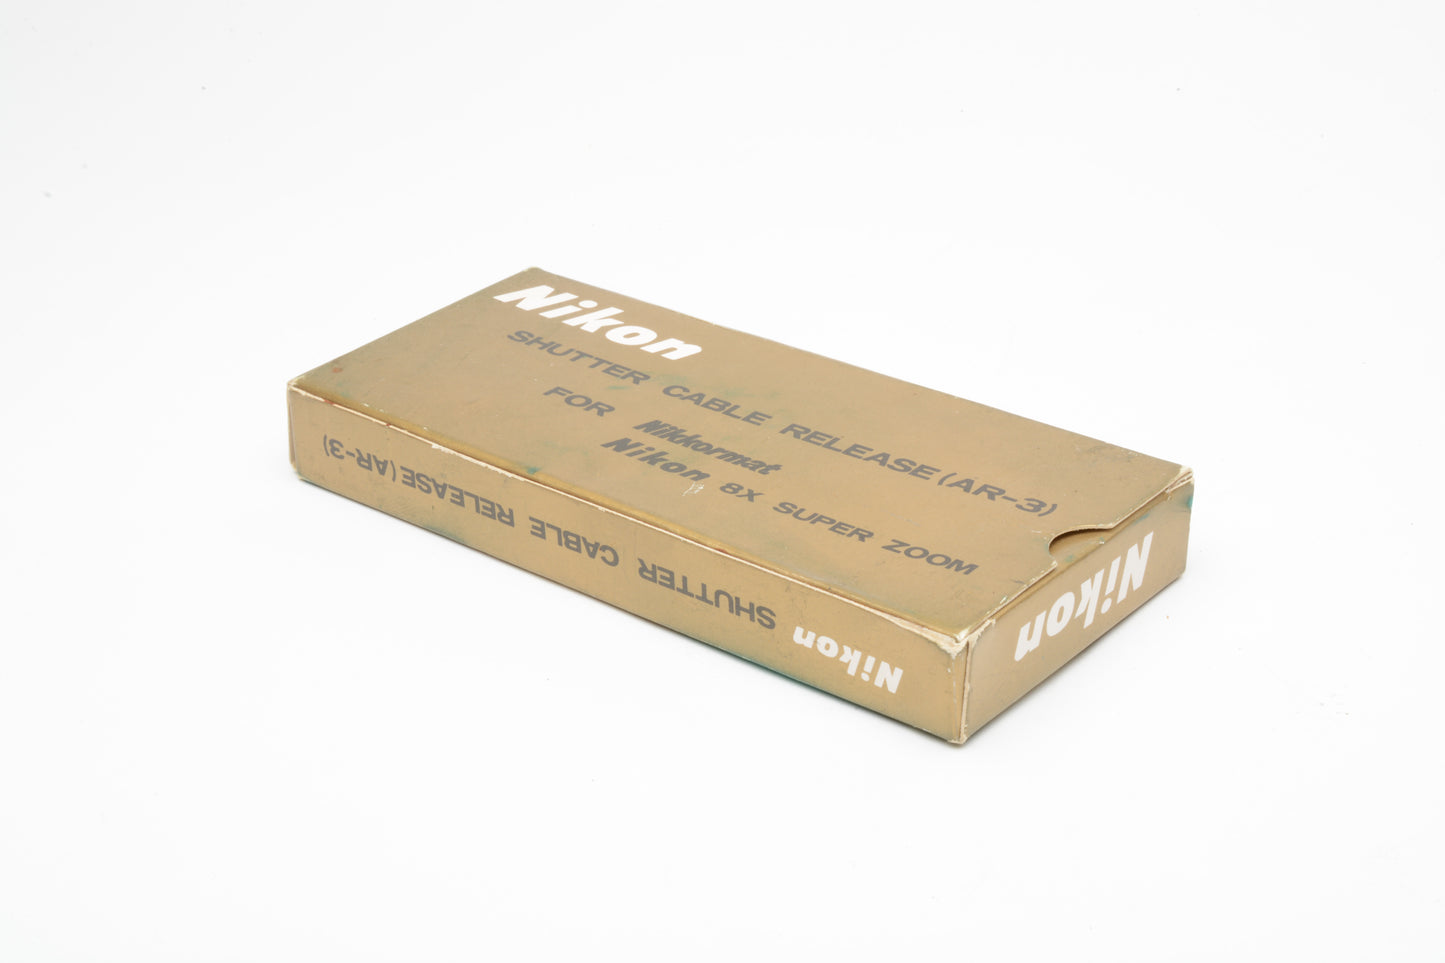 Nikon AR-3 cable release, New in box